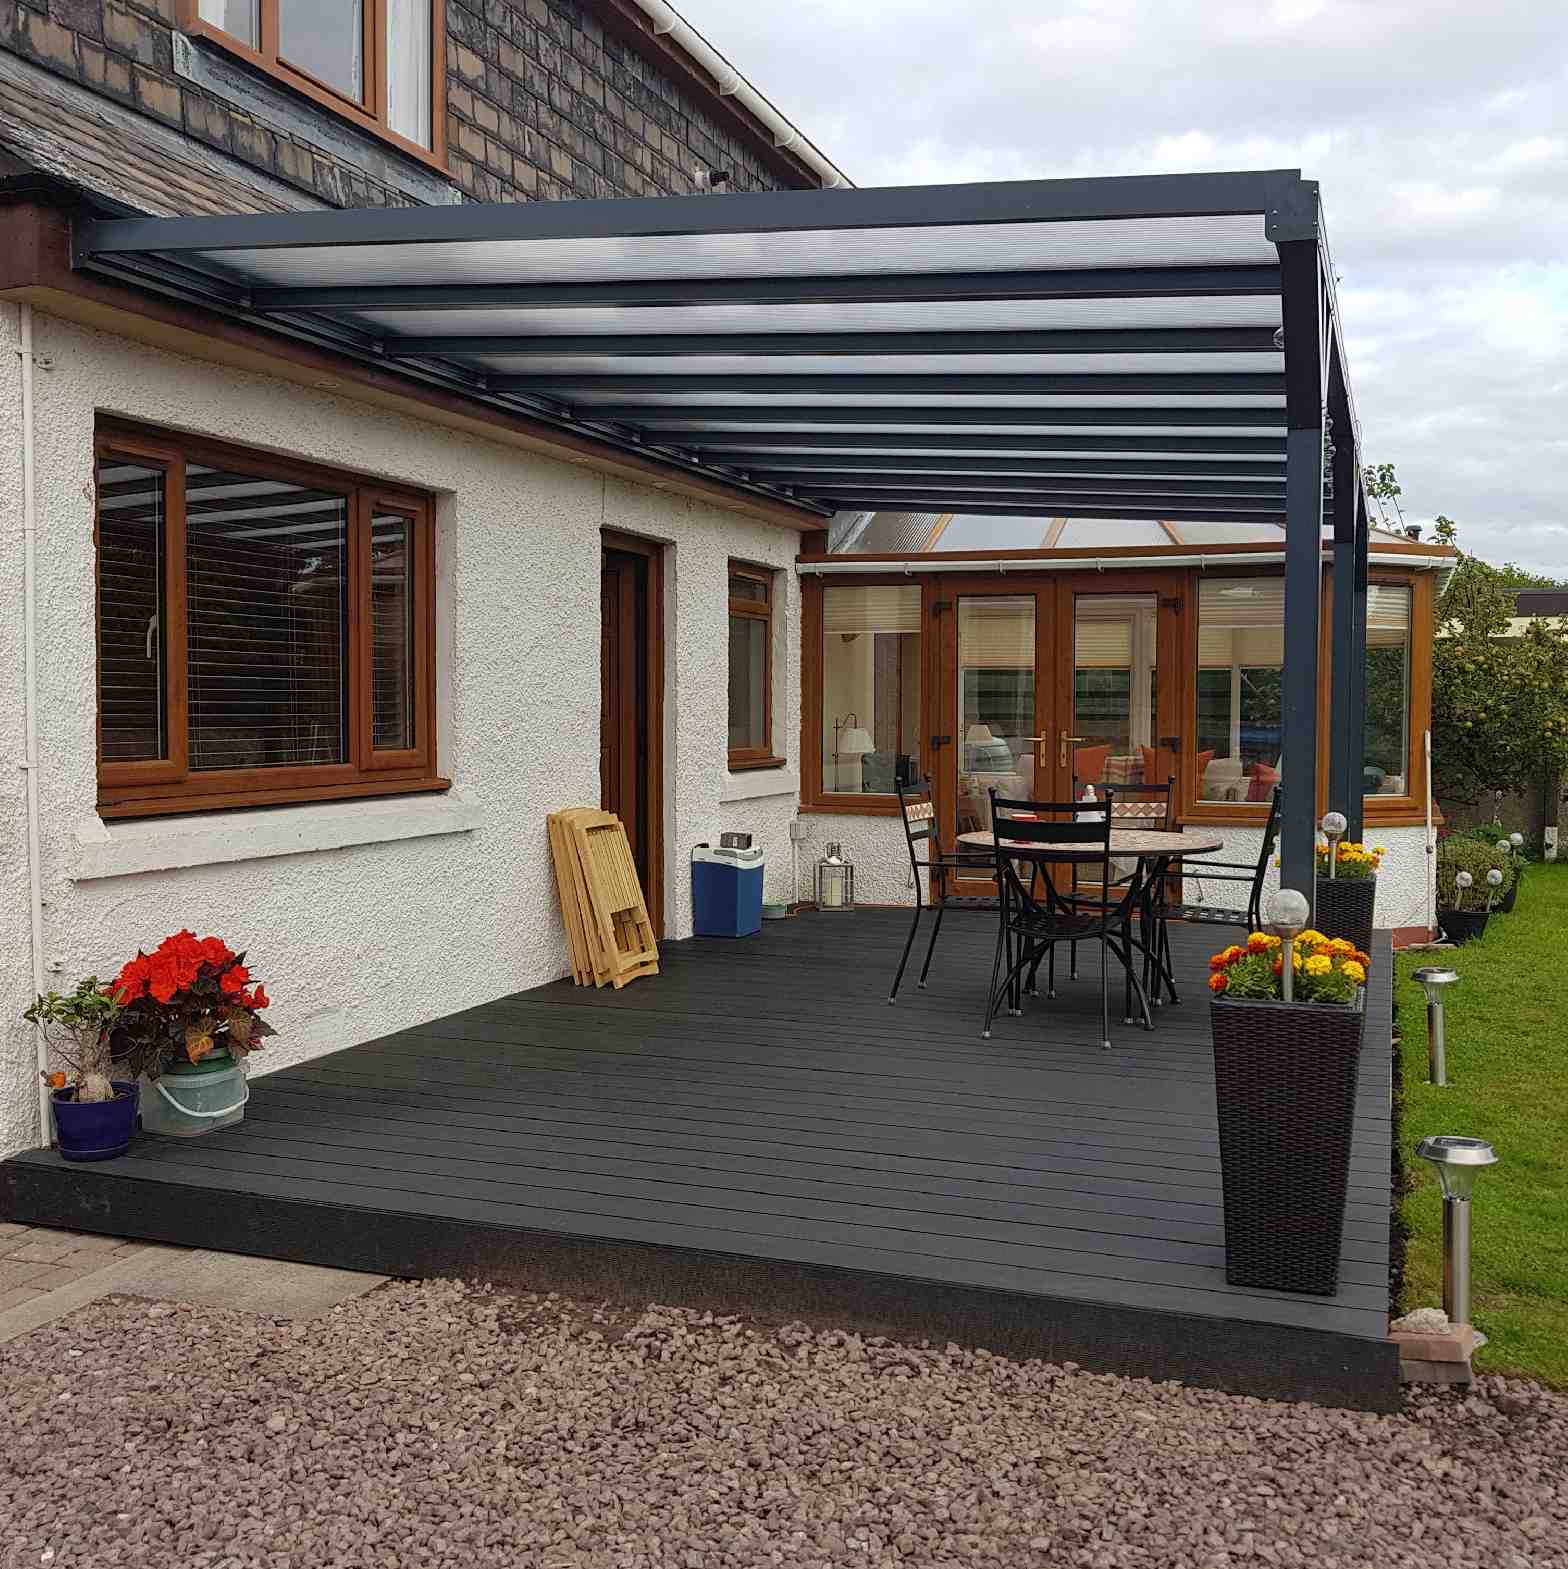 Buy Omega Verandah, Anthracite Grey, 16mm Polycarbonate Glazing - 9.5m (W) x 2.0m (P), (5) Supporting Posts online today